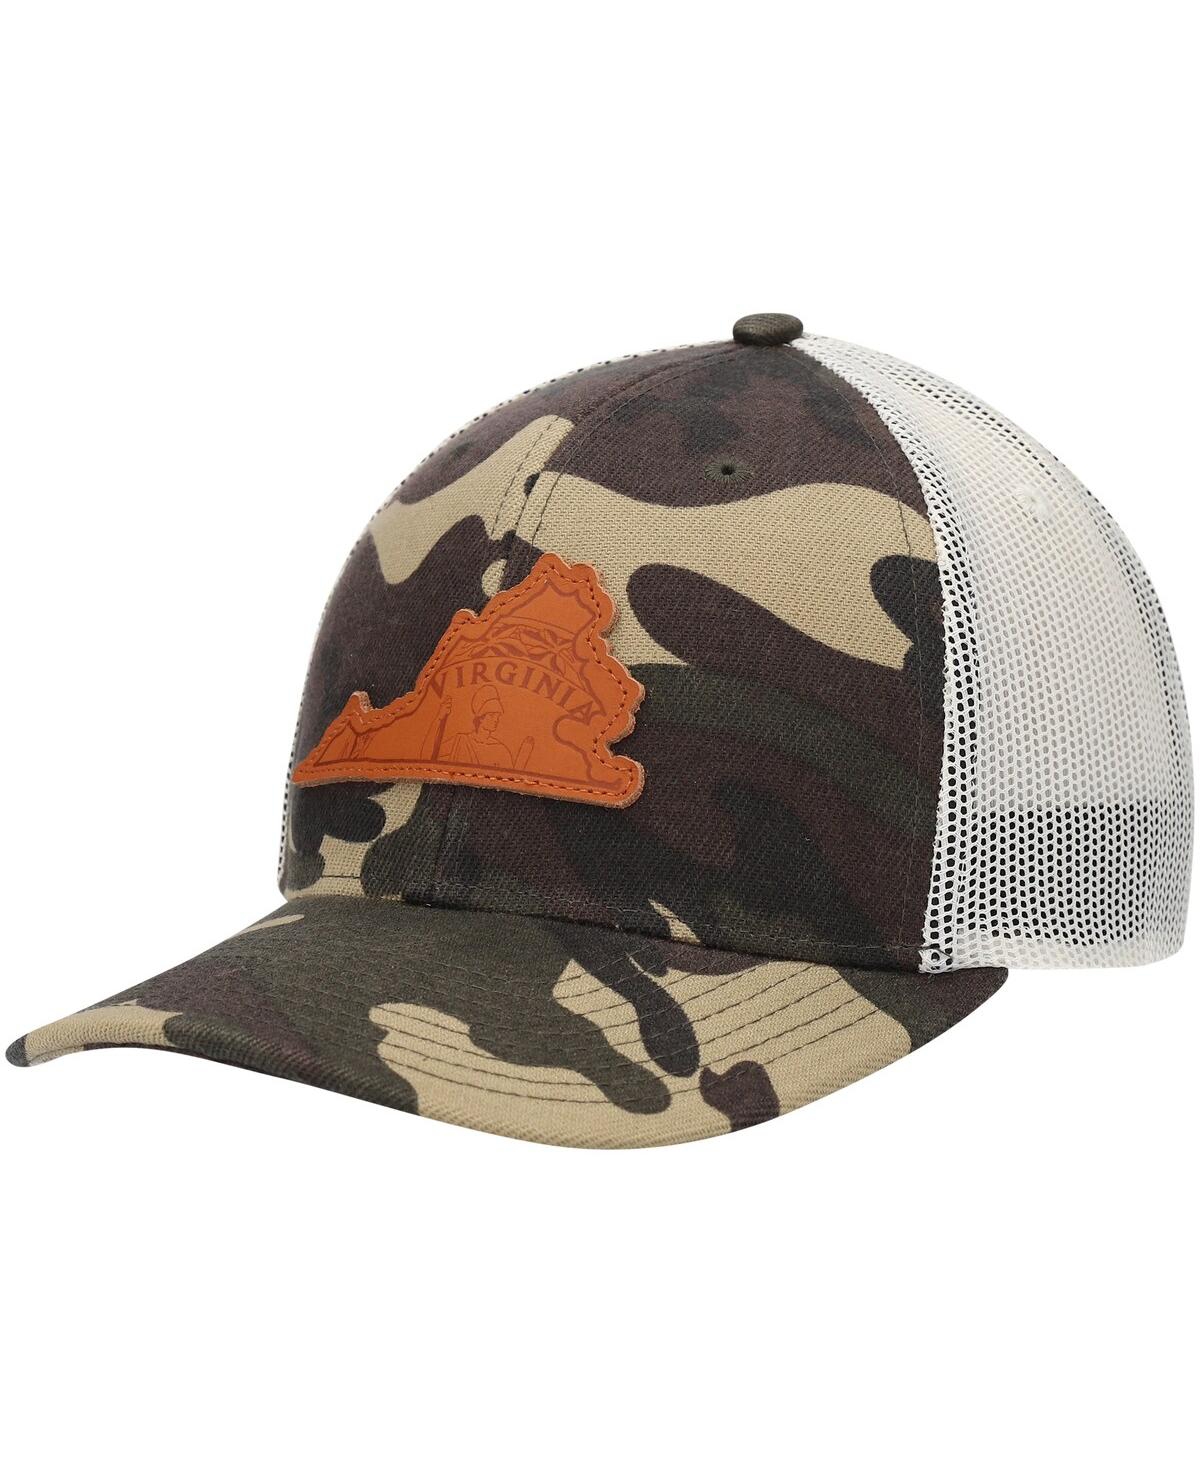 Local Crowns Men's  Camo Virginia Icon Woodland State Patch Trucker Snapback Hat